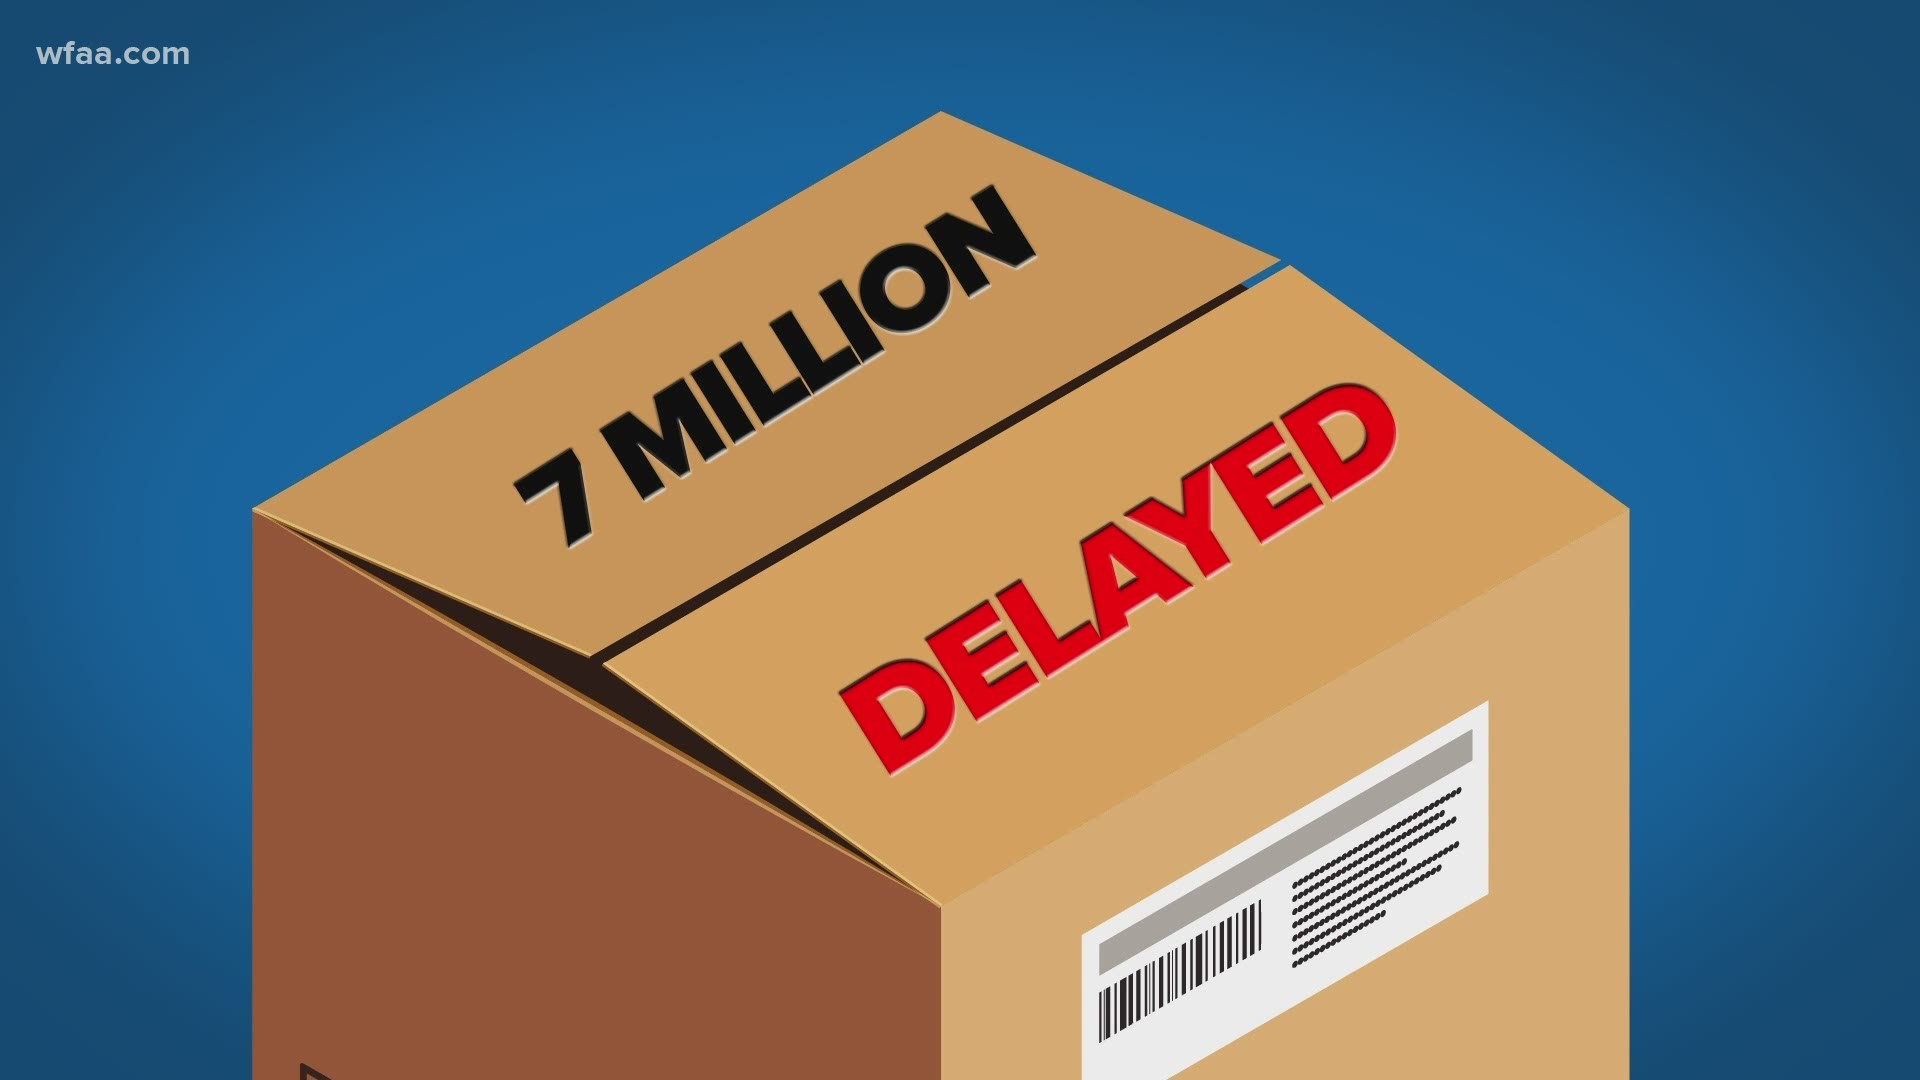 While delivery services are ramping up to handle the swell of holiday packages, one expert says it still probably won't be enough to meet demand.